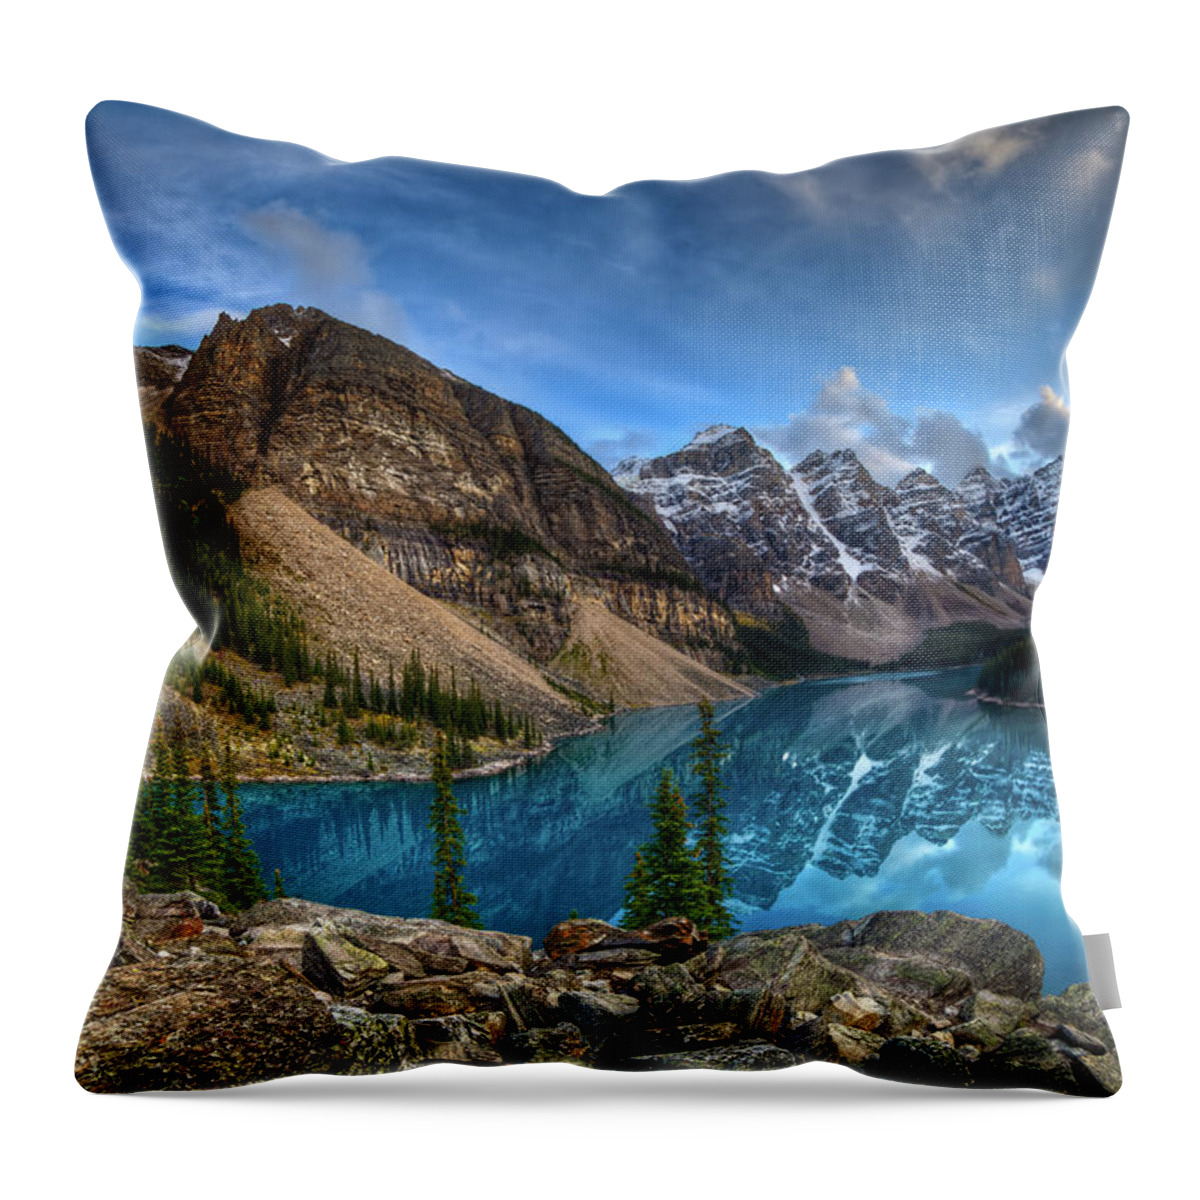 Tranquility Throw Pillow featuring the photograph Moraine Lake, Alberta by Basic Elements Photography